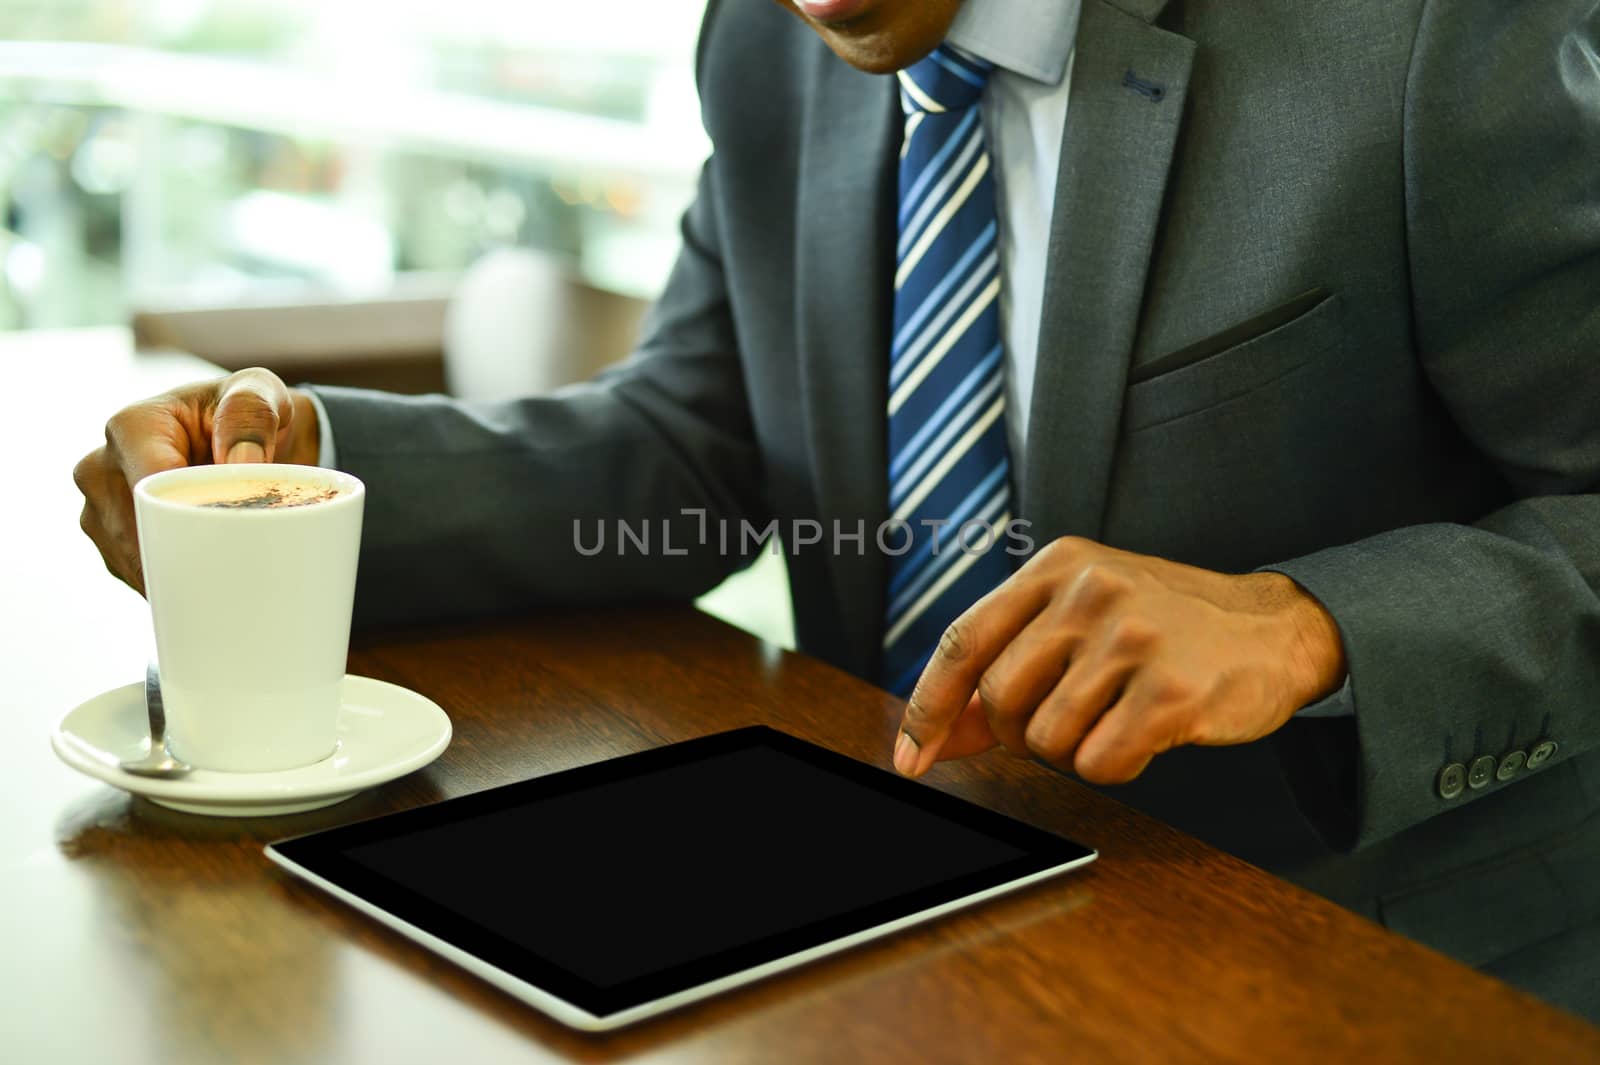 Digital tablet, made my job easy.  by stockyimages